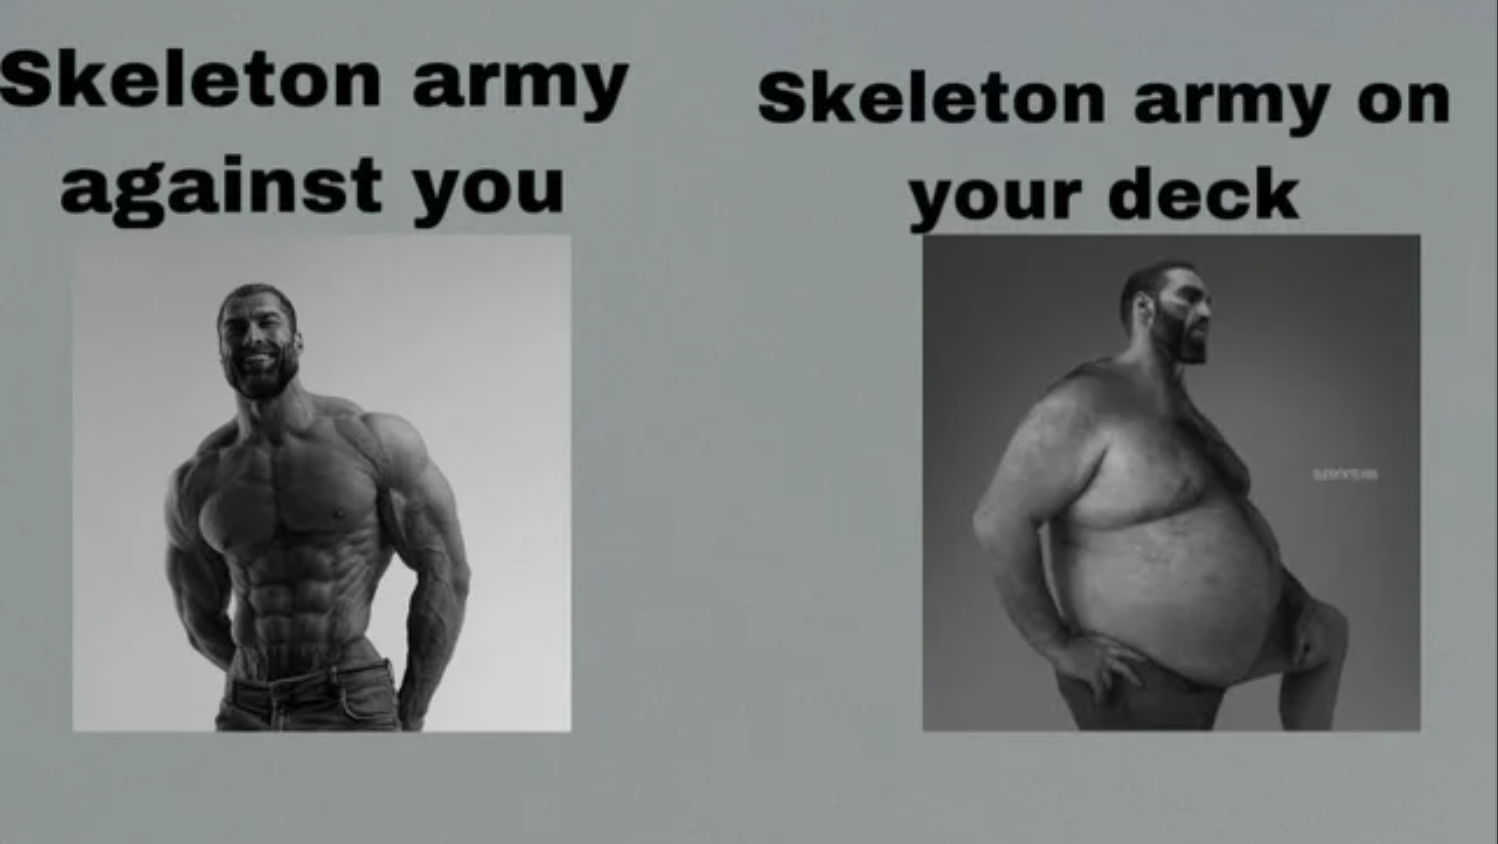 Gaming Memes - tux windows - Skeleton army Skeleton army on against you your deck